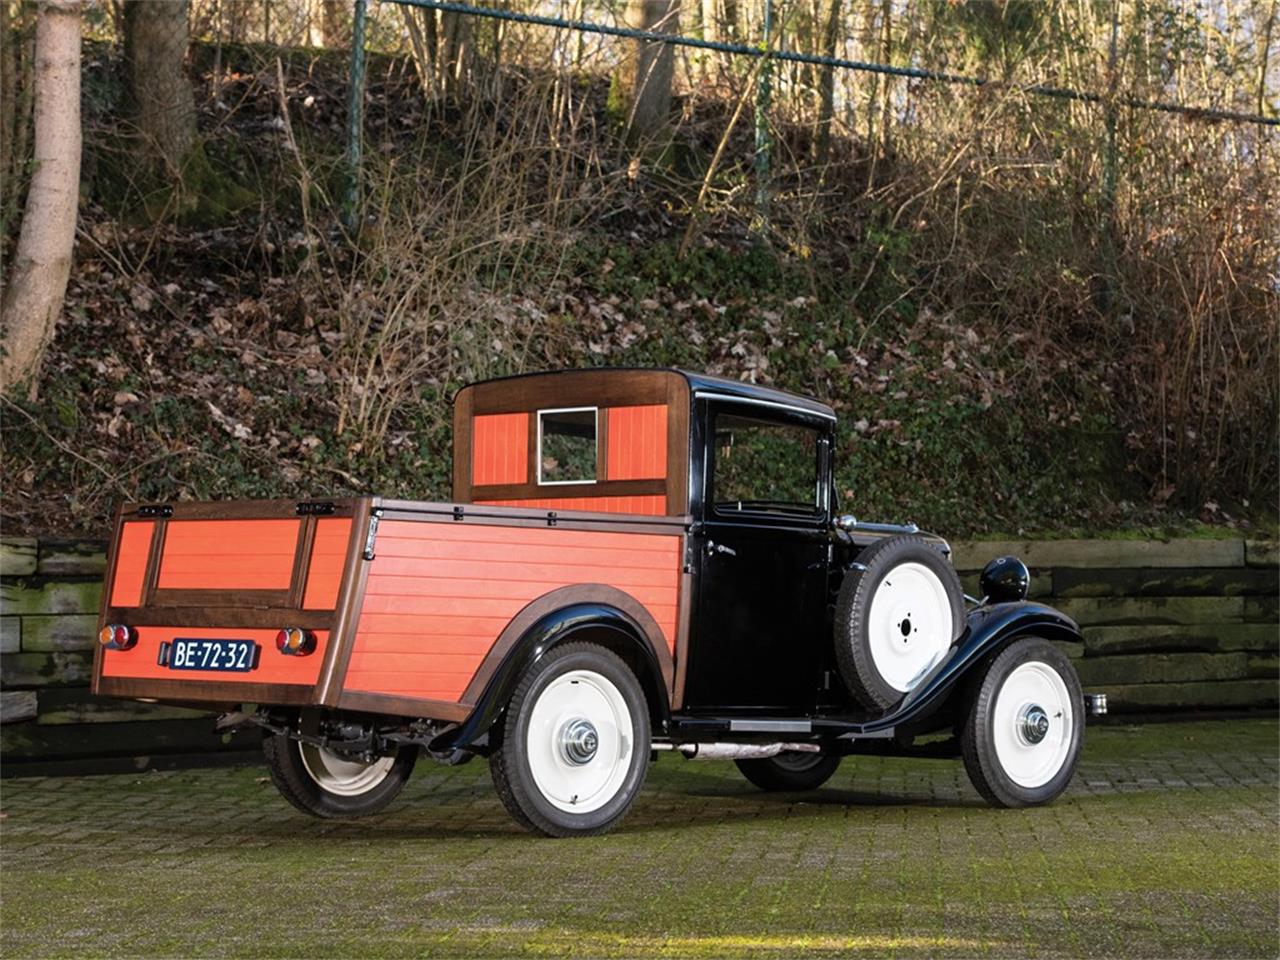 For Sale at Auction: 1932 Fiat 508 Balilla Pickup for sale in Essen, Other